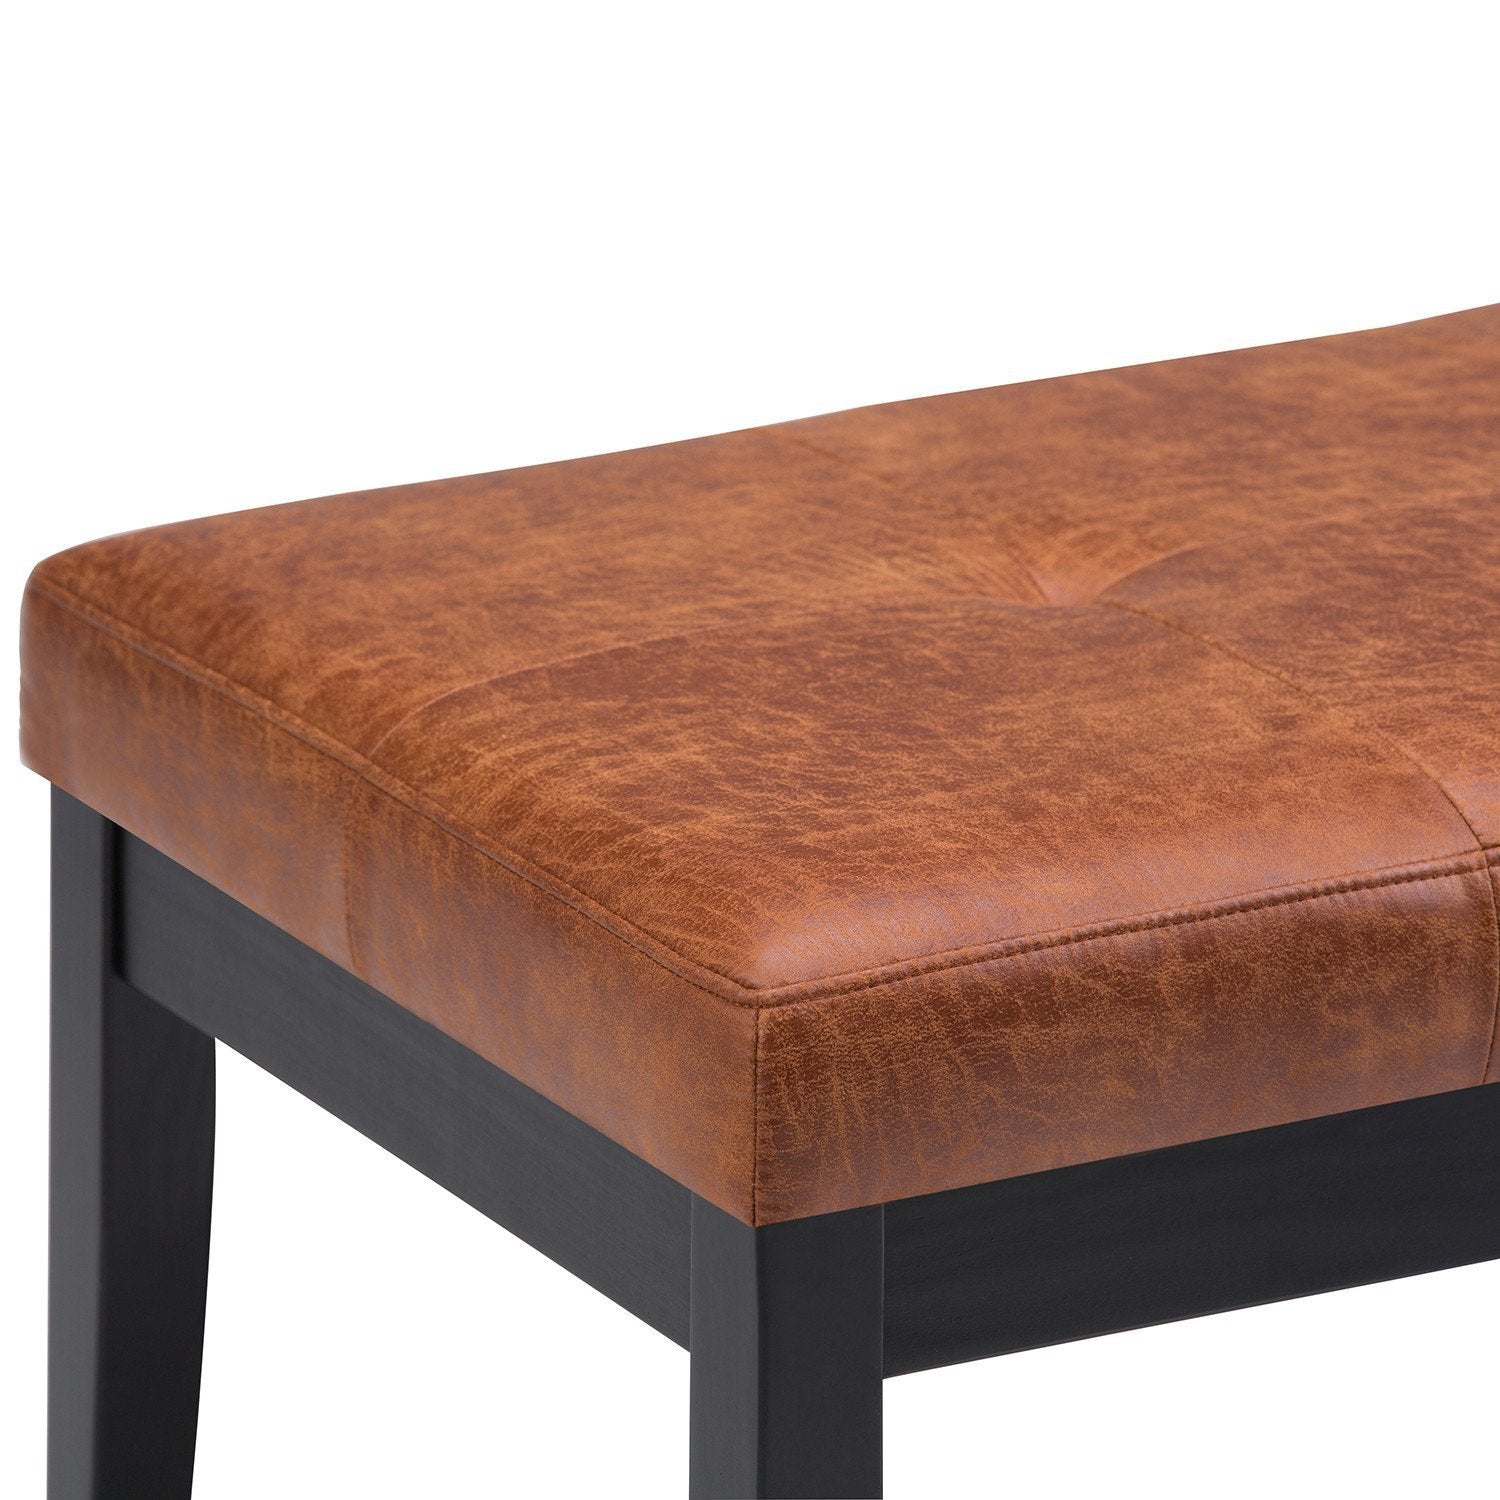 Distressed Saddle Brown Distressed Vegan Leather | Lacey Tufted Ottoman Bench